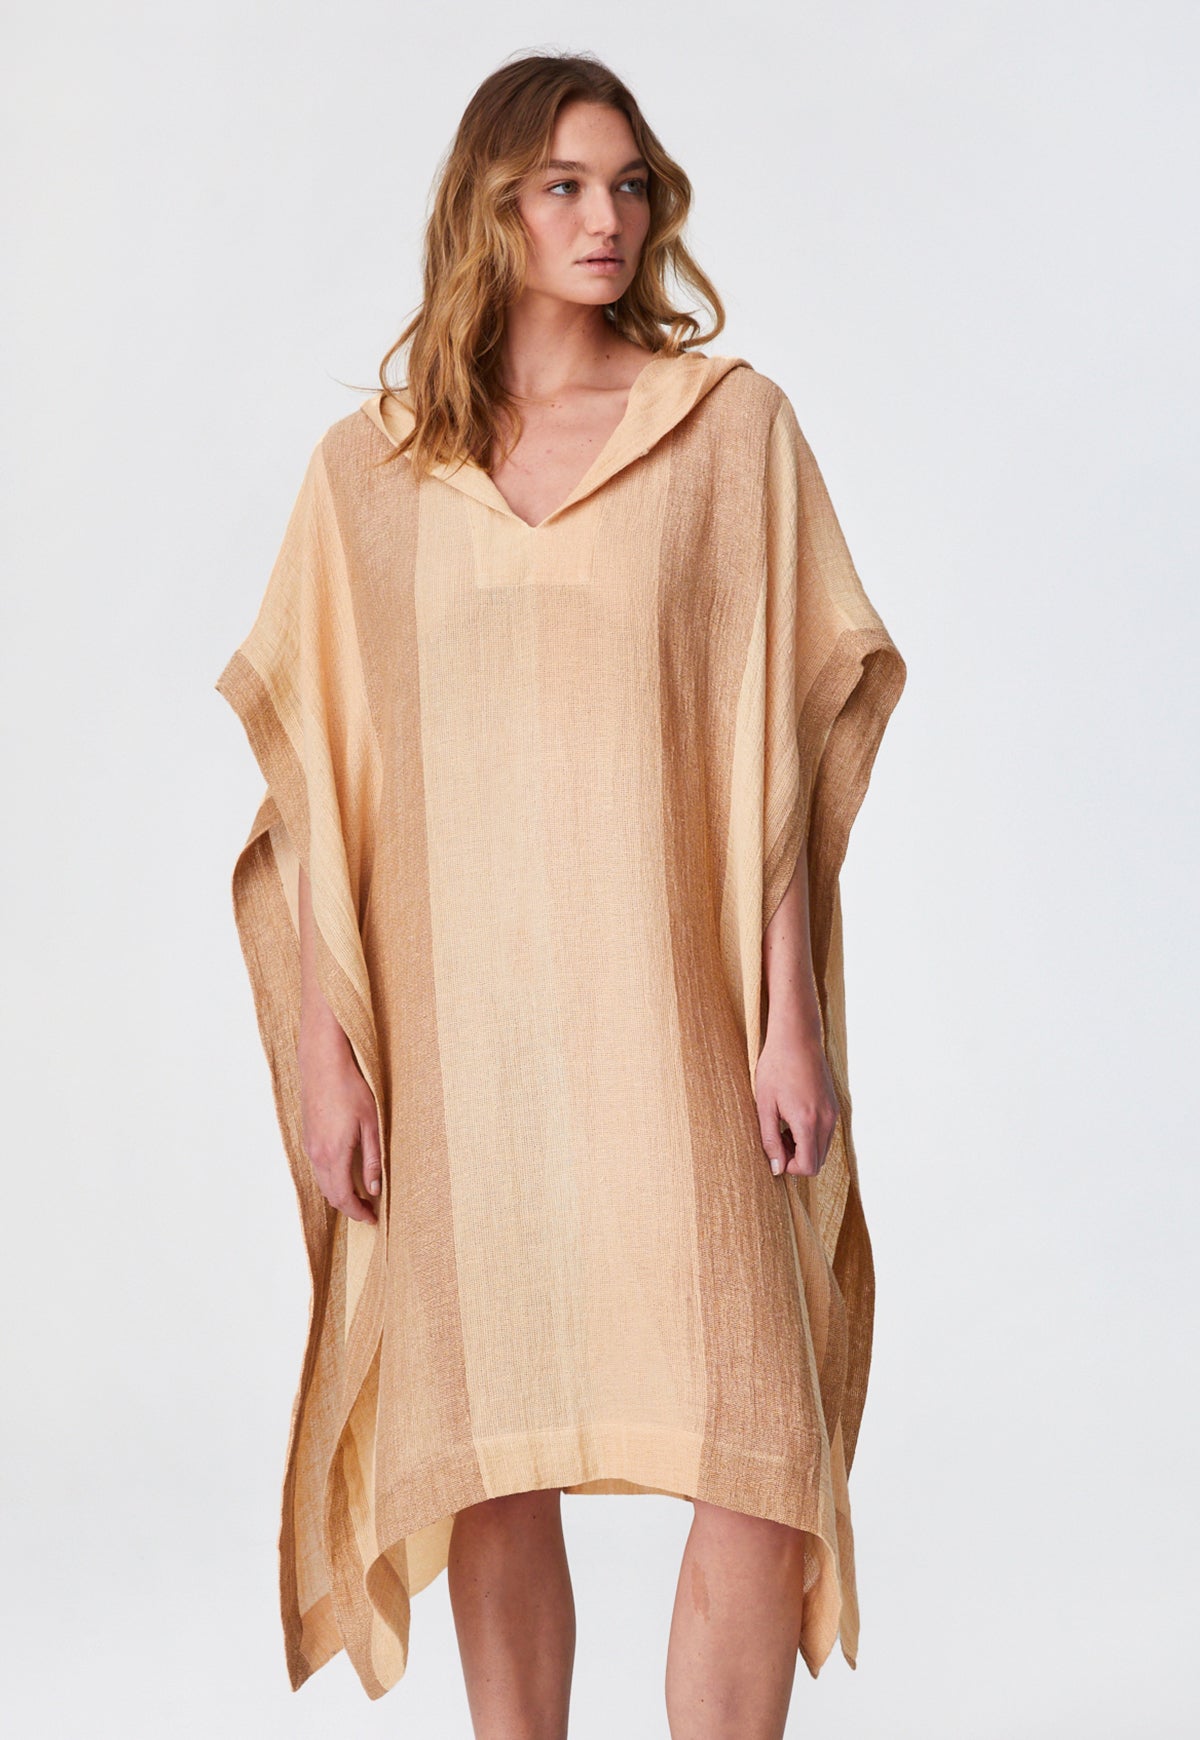 THE BEACH PONCHO in DESERT AWNING STRIPED CHIOS GAUZE